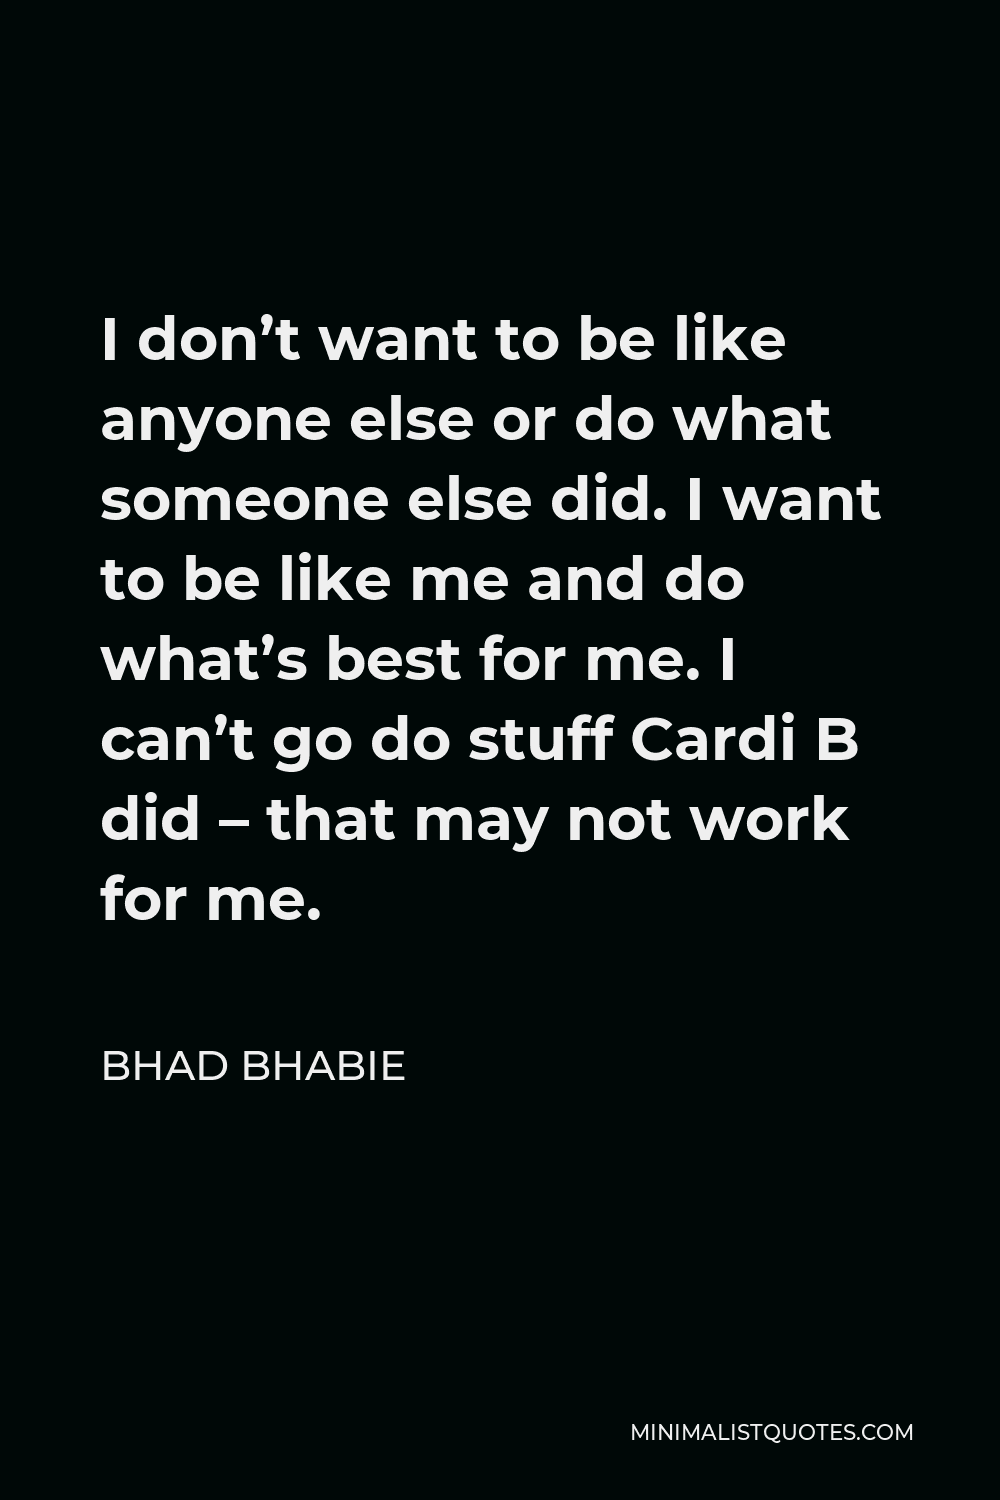 Bhad Bhabie Quote - I don’t want to be like anyone else or do what someone else did. I want to be like me and do what’s best for me. I can’t go do stuff Cardi B did – that may not work for me.